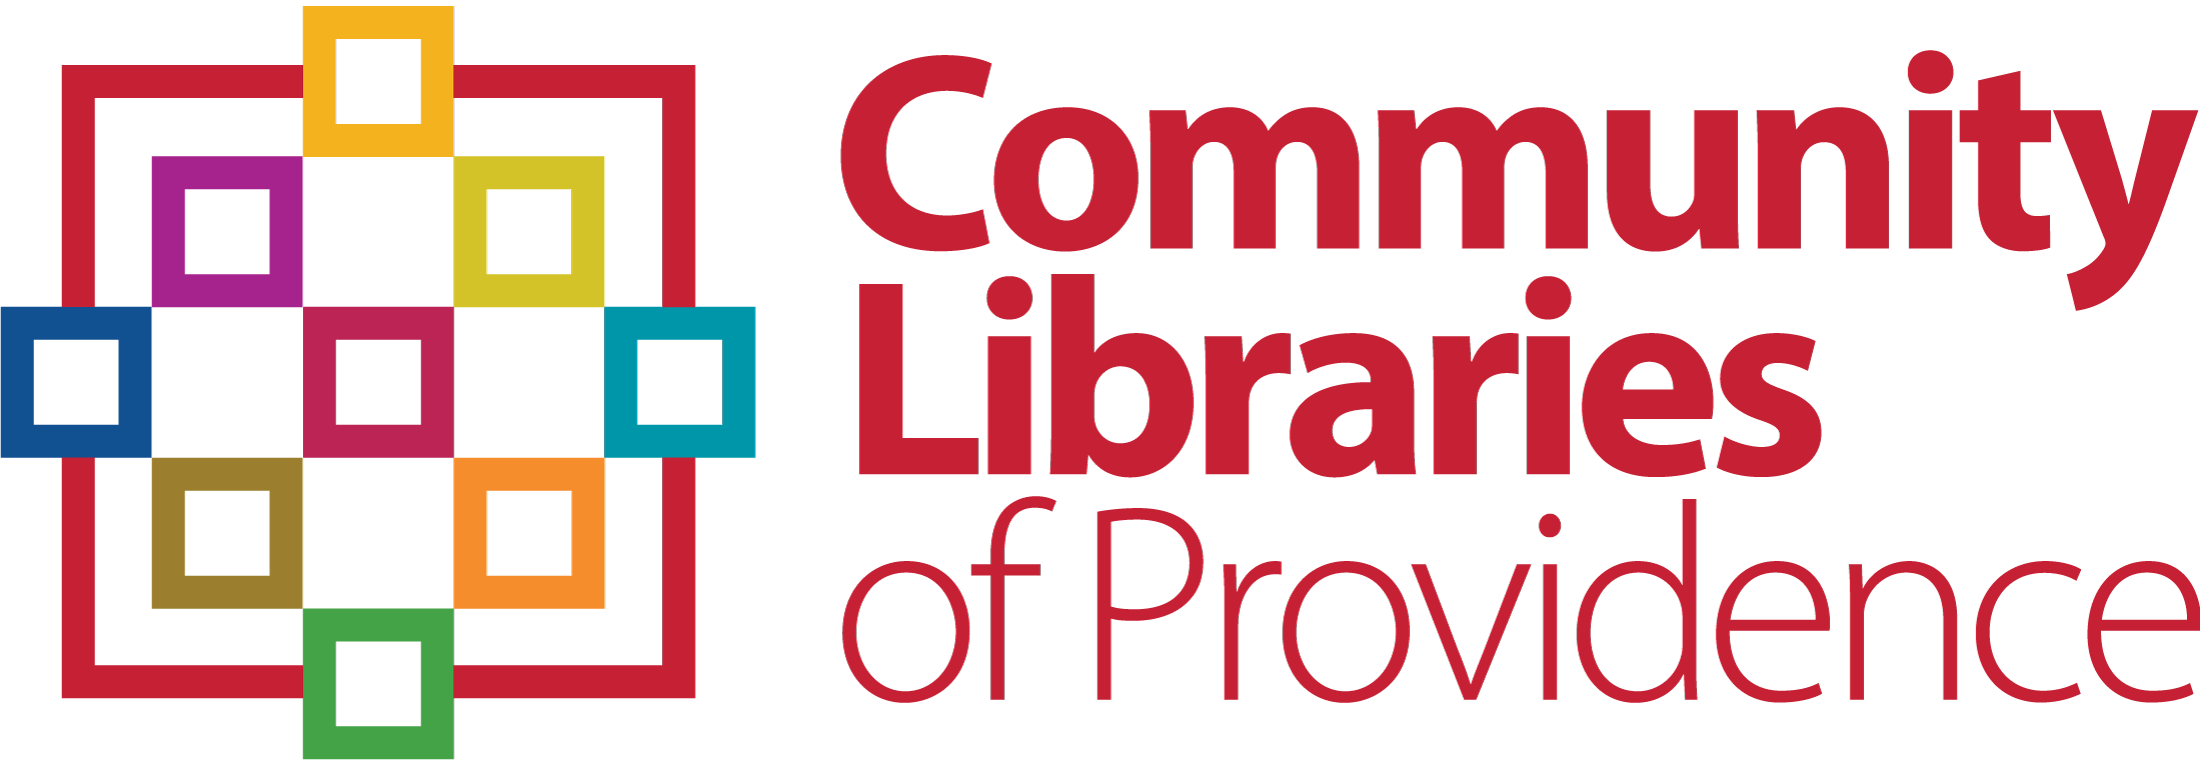  Community Libraries of Providence Helpdesk